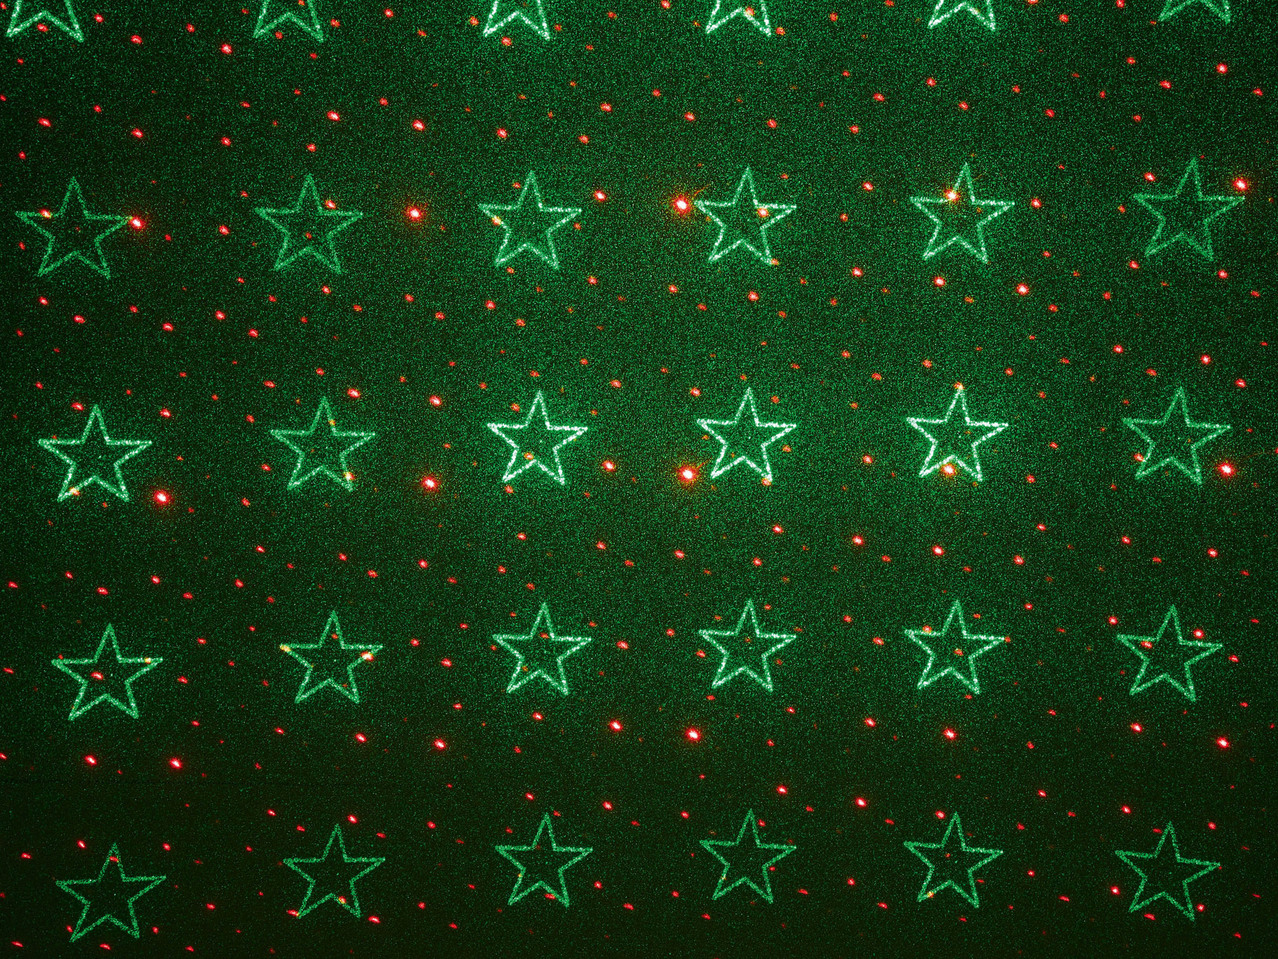 Laser Projector with Christmas Effects